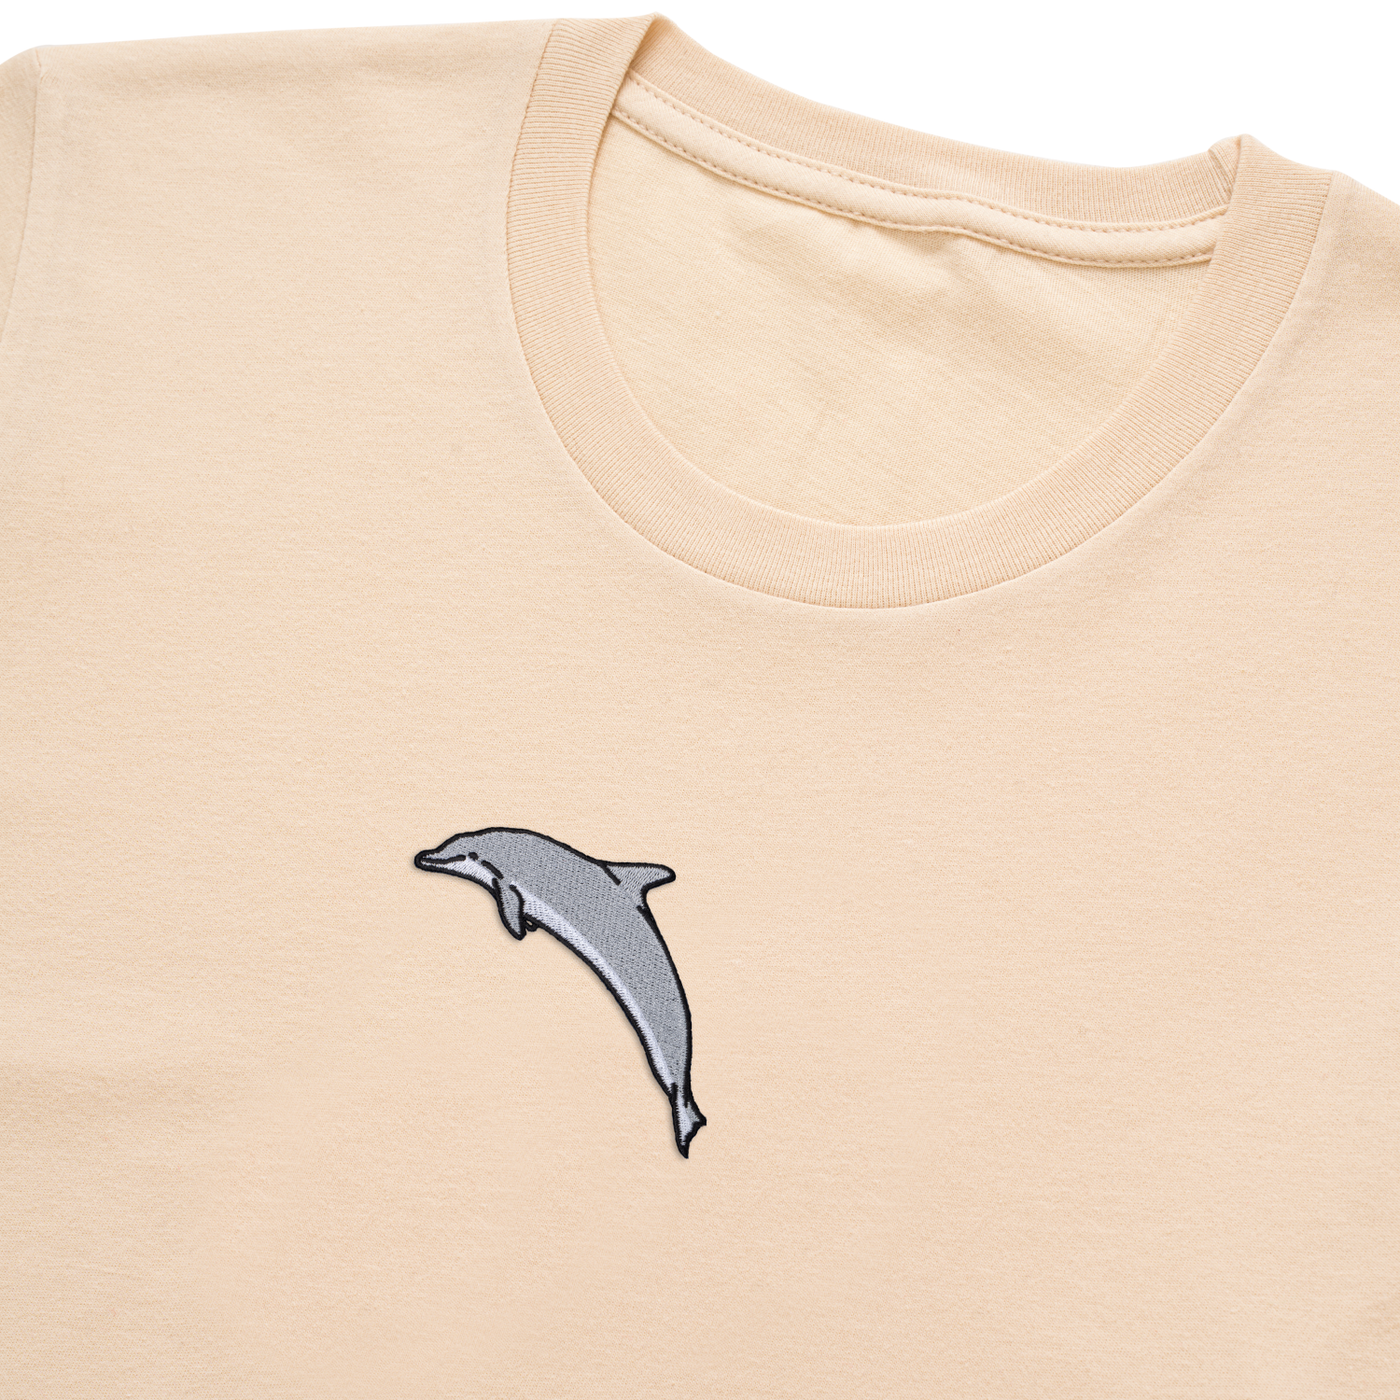 Bobby's Planet Women's Embroidered Dolphin T-Shirt from Seven Seas Fish Animals Collection in Soft Cream Color#color_soft-cream